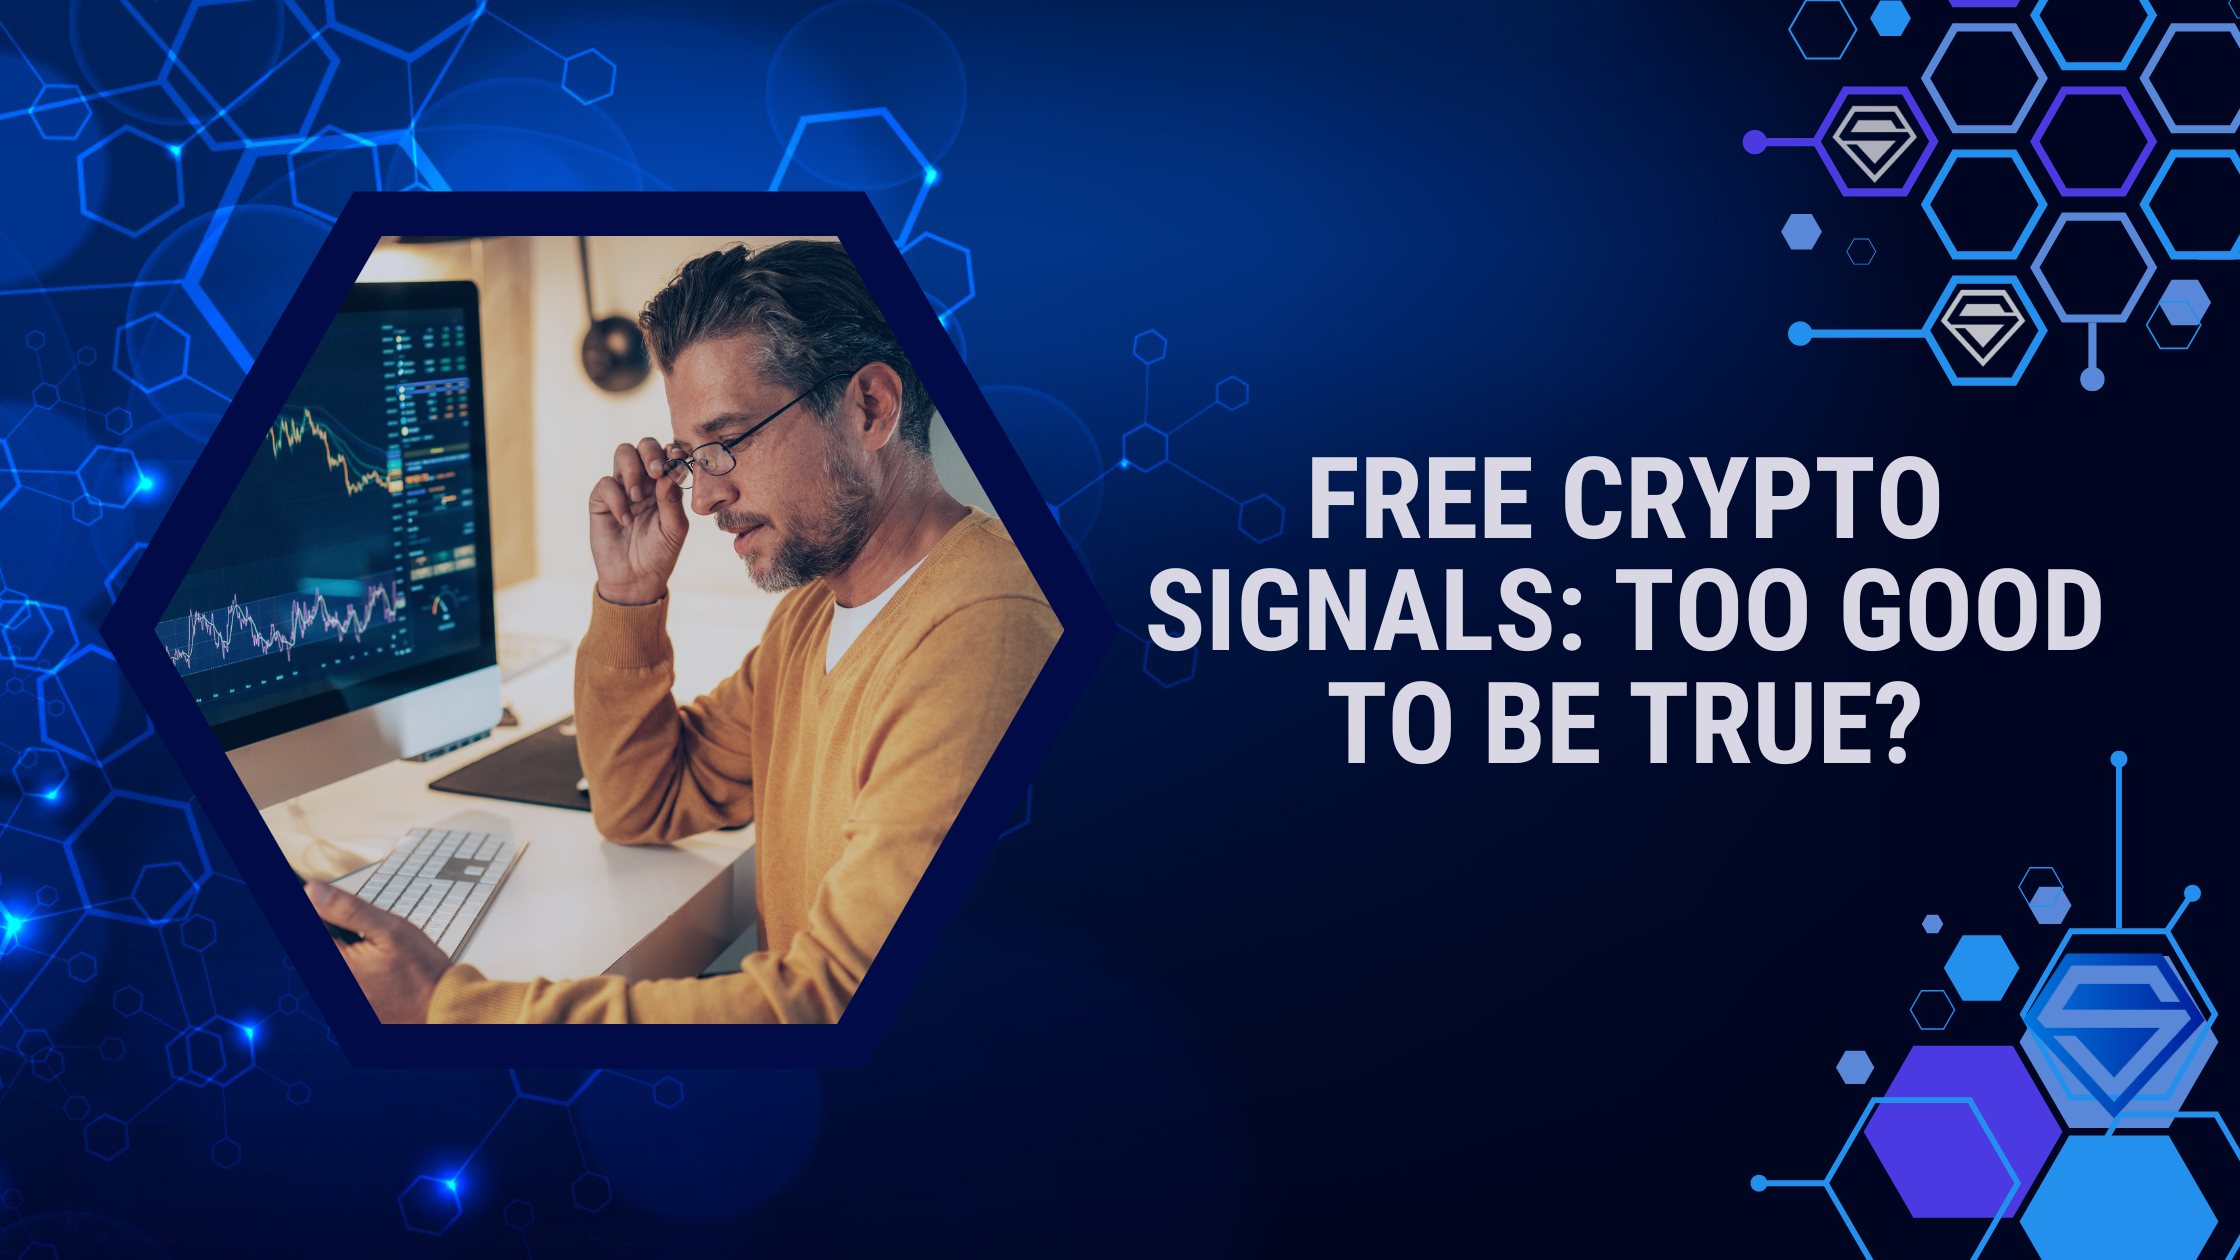 Free Crypto Signals: Too Good to Be True? Exposing the Risks and Alternatives